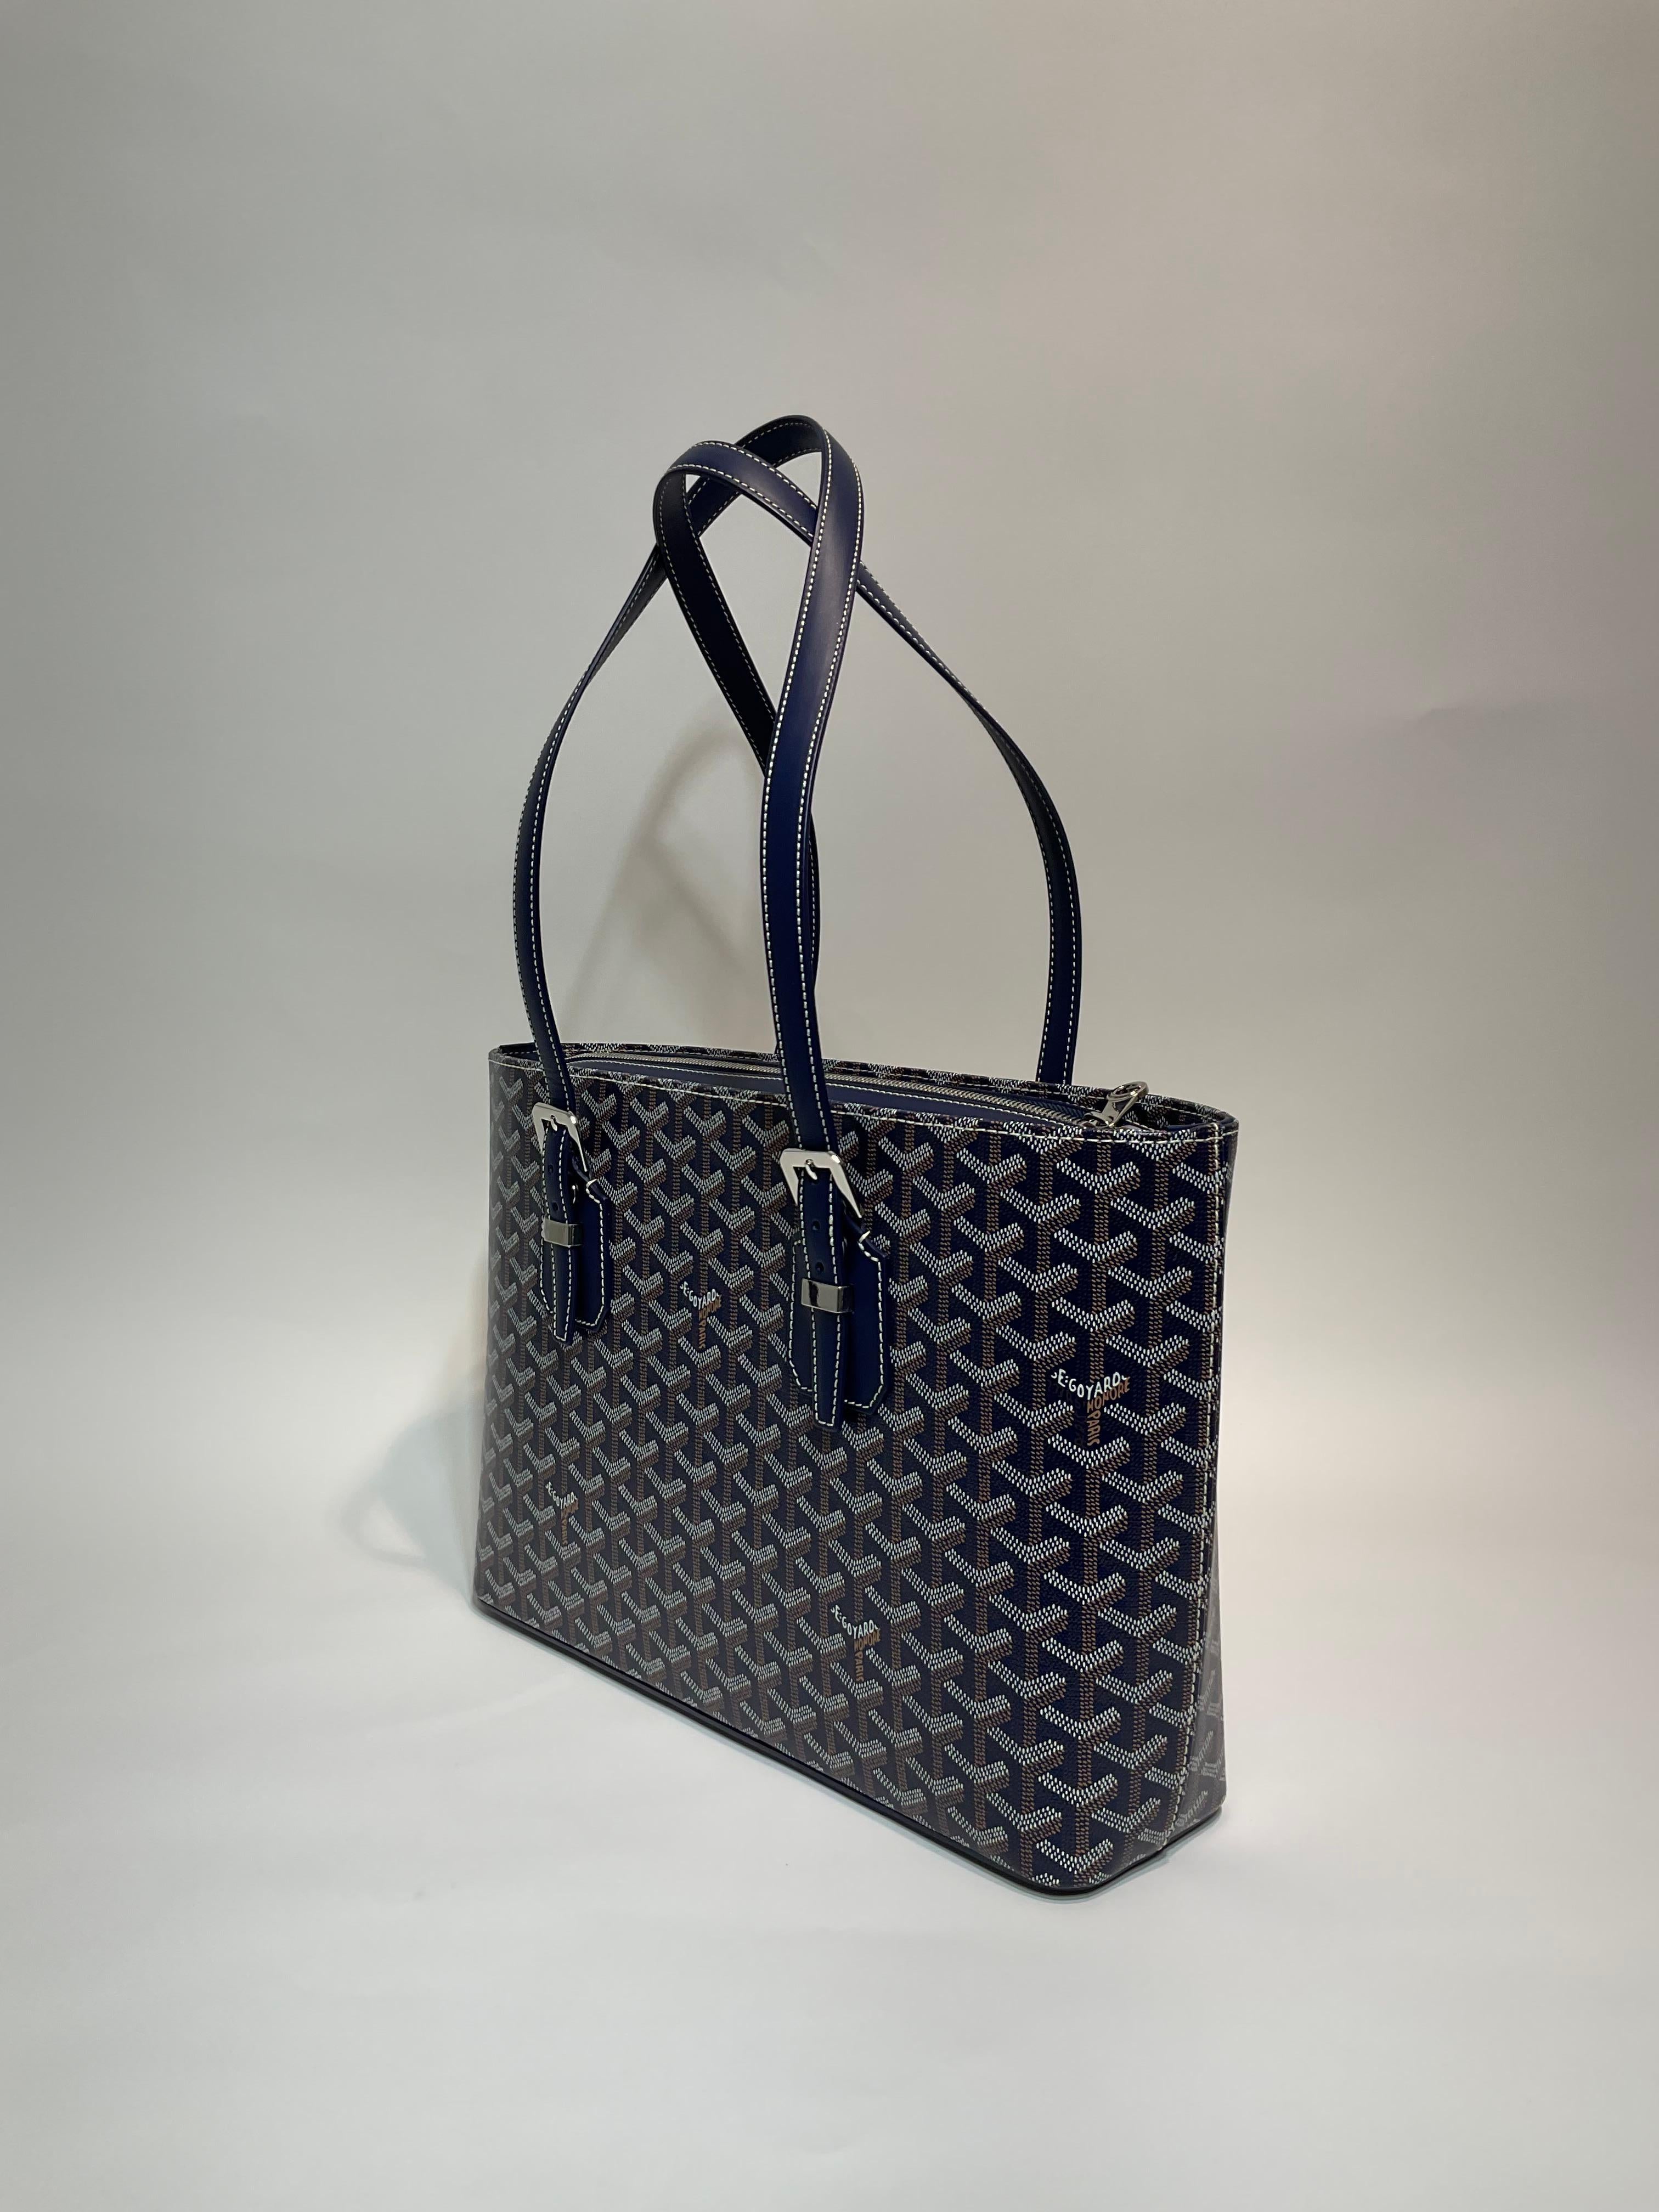 Goyard Navy Okinawa PM Tote In Excellent Condition For Sale In Palm Beach, FL